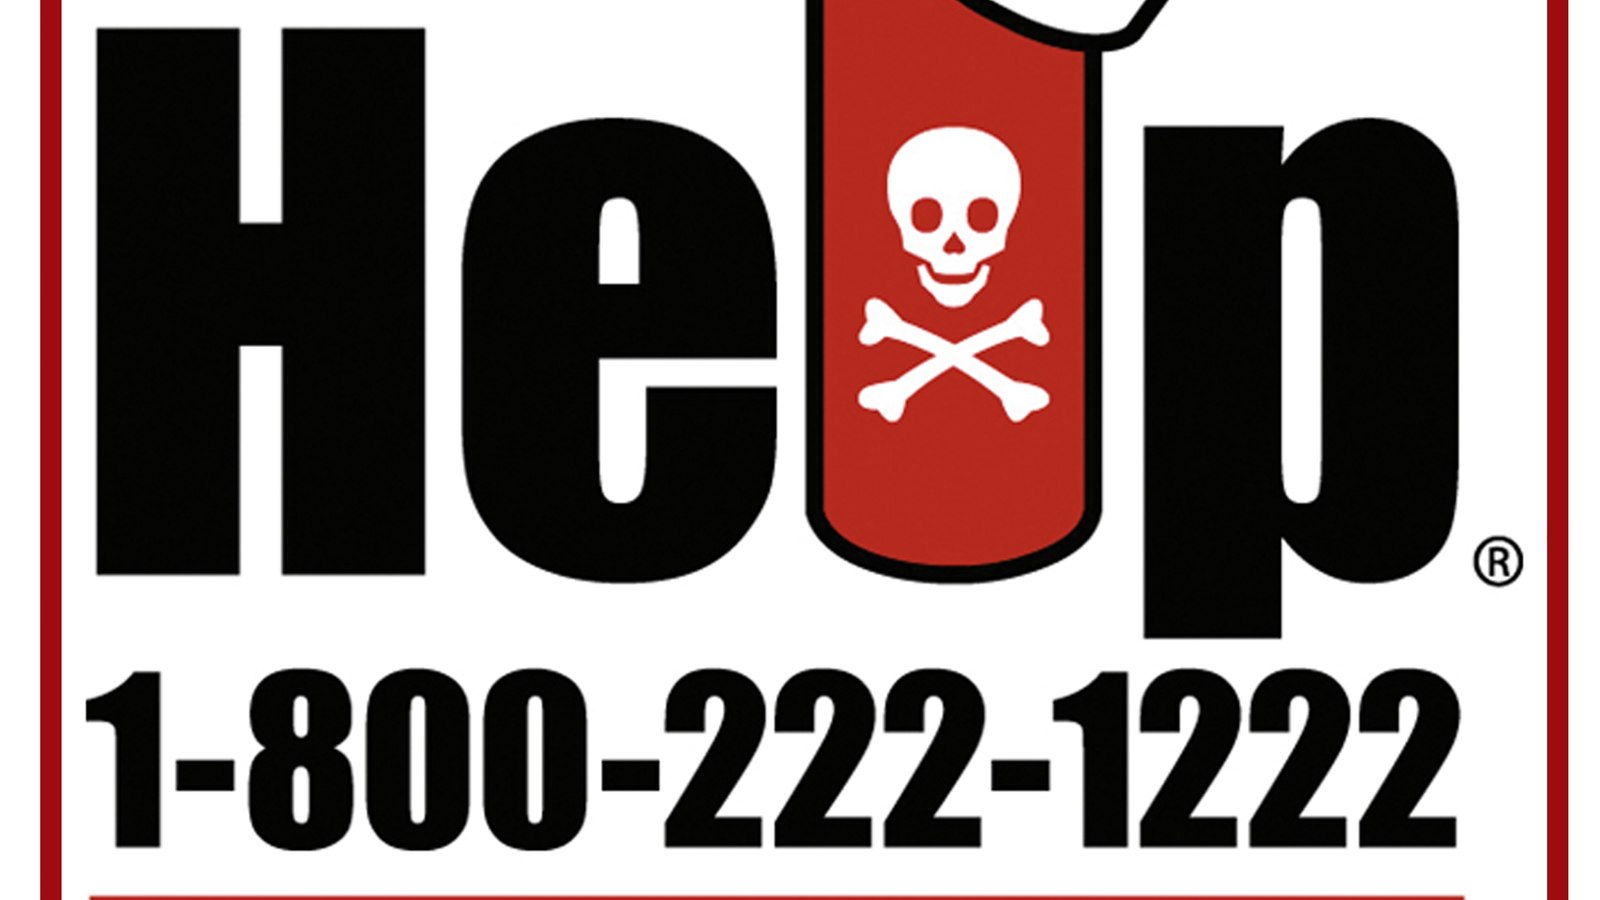 Call poison control, 1-800-222-1222, for lifesaving treatment info